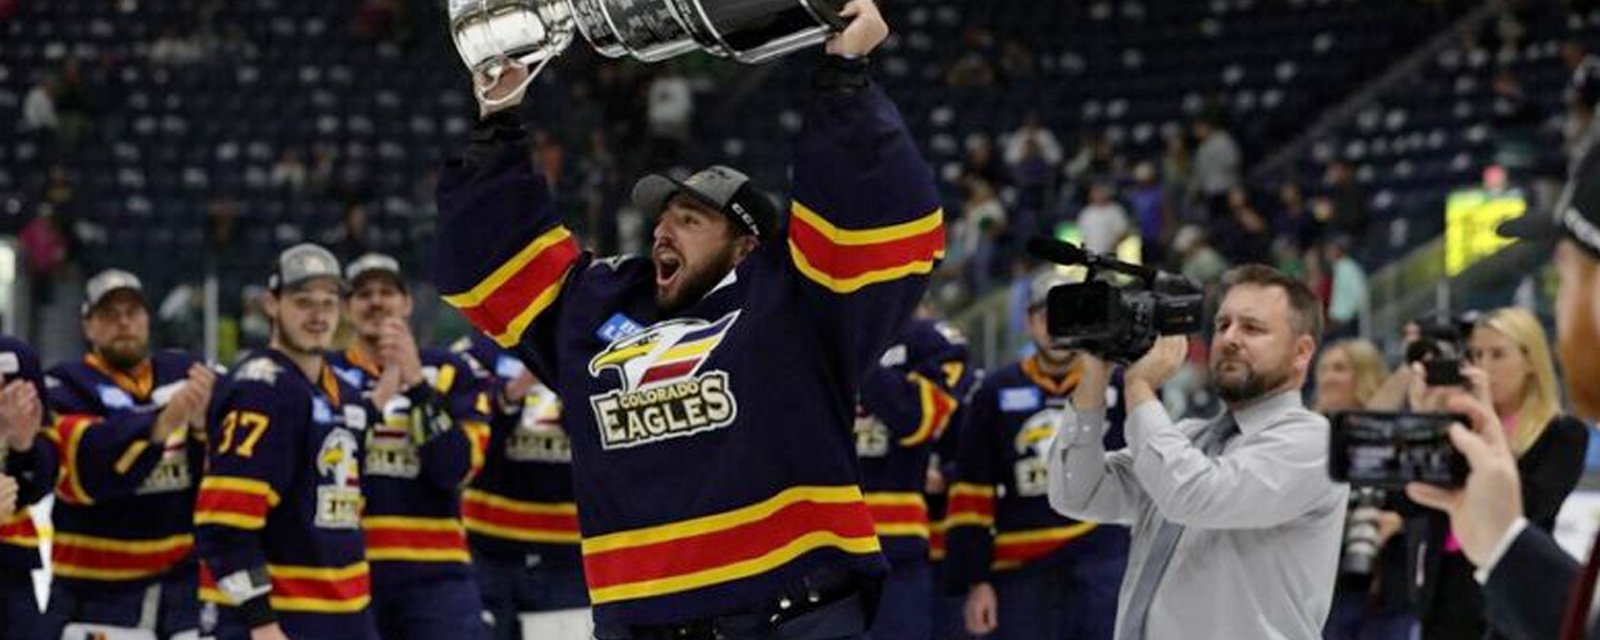 ECHL champions refuse to return the Cup!